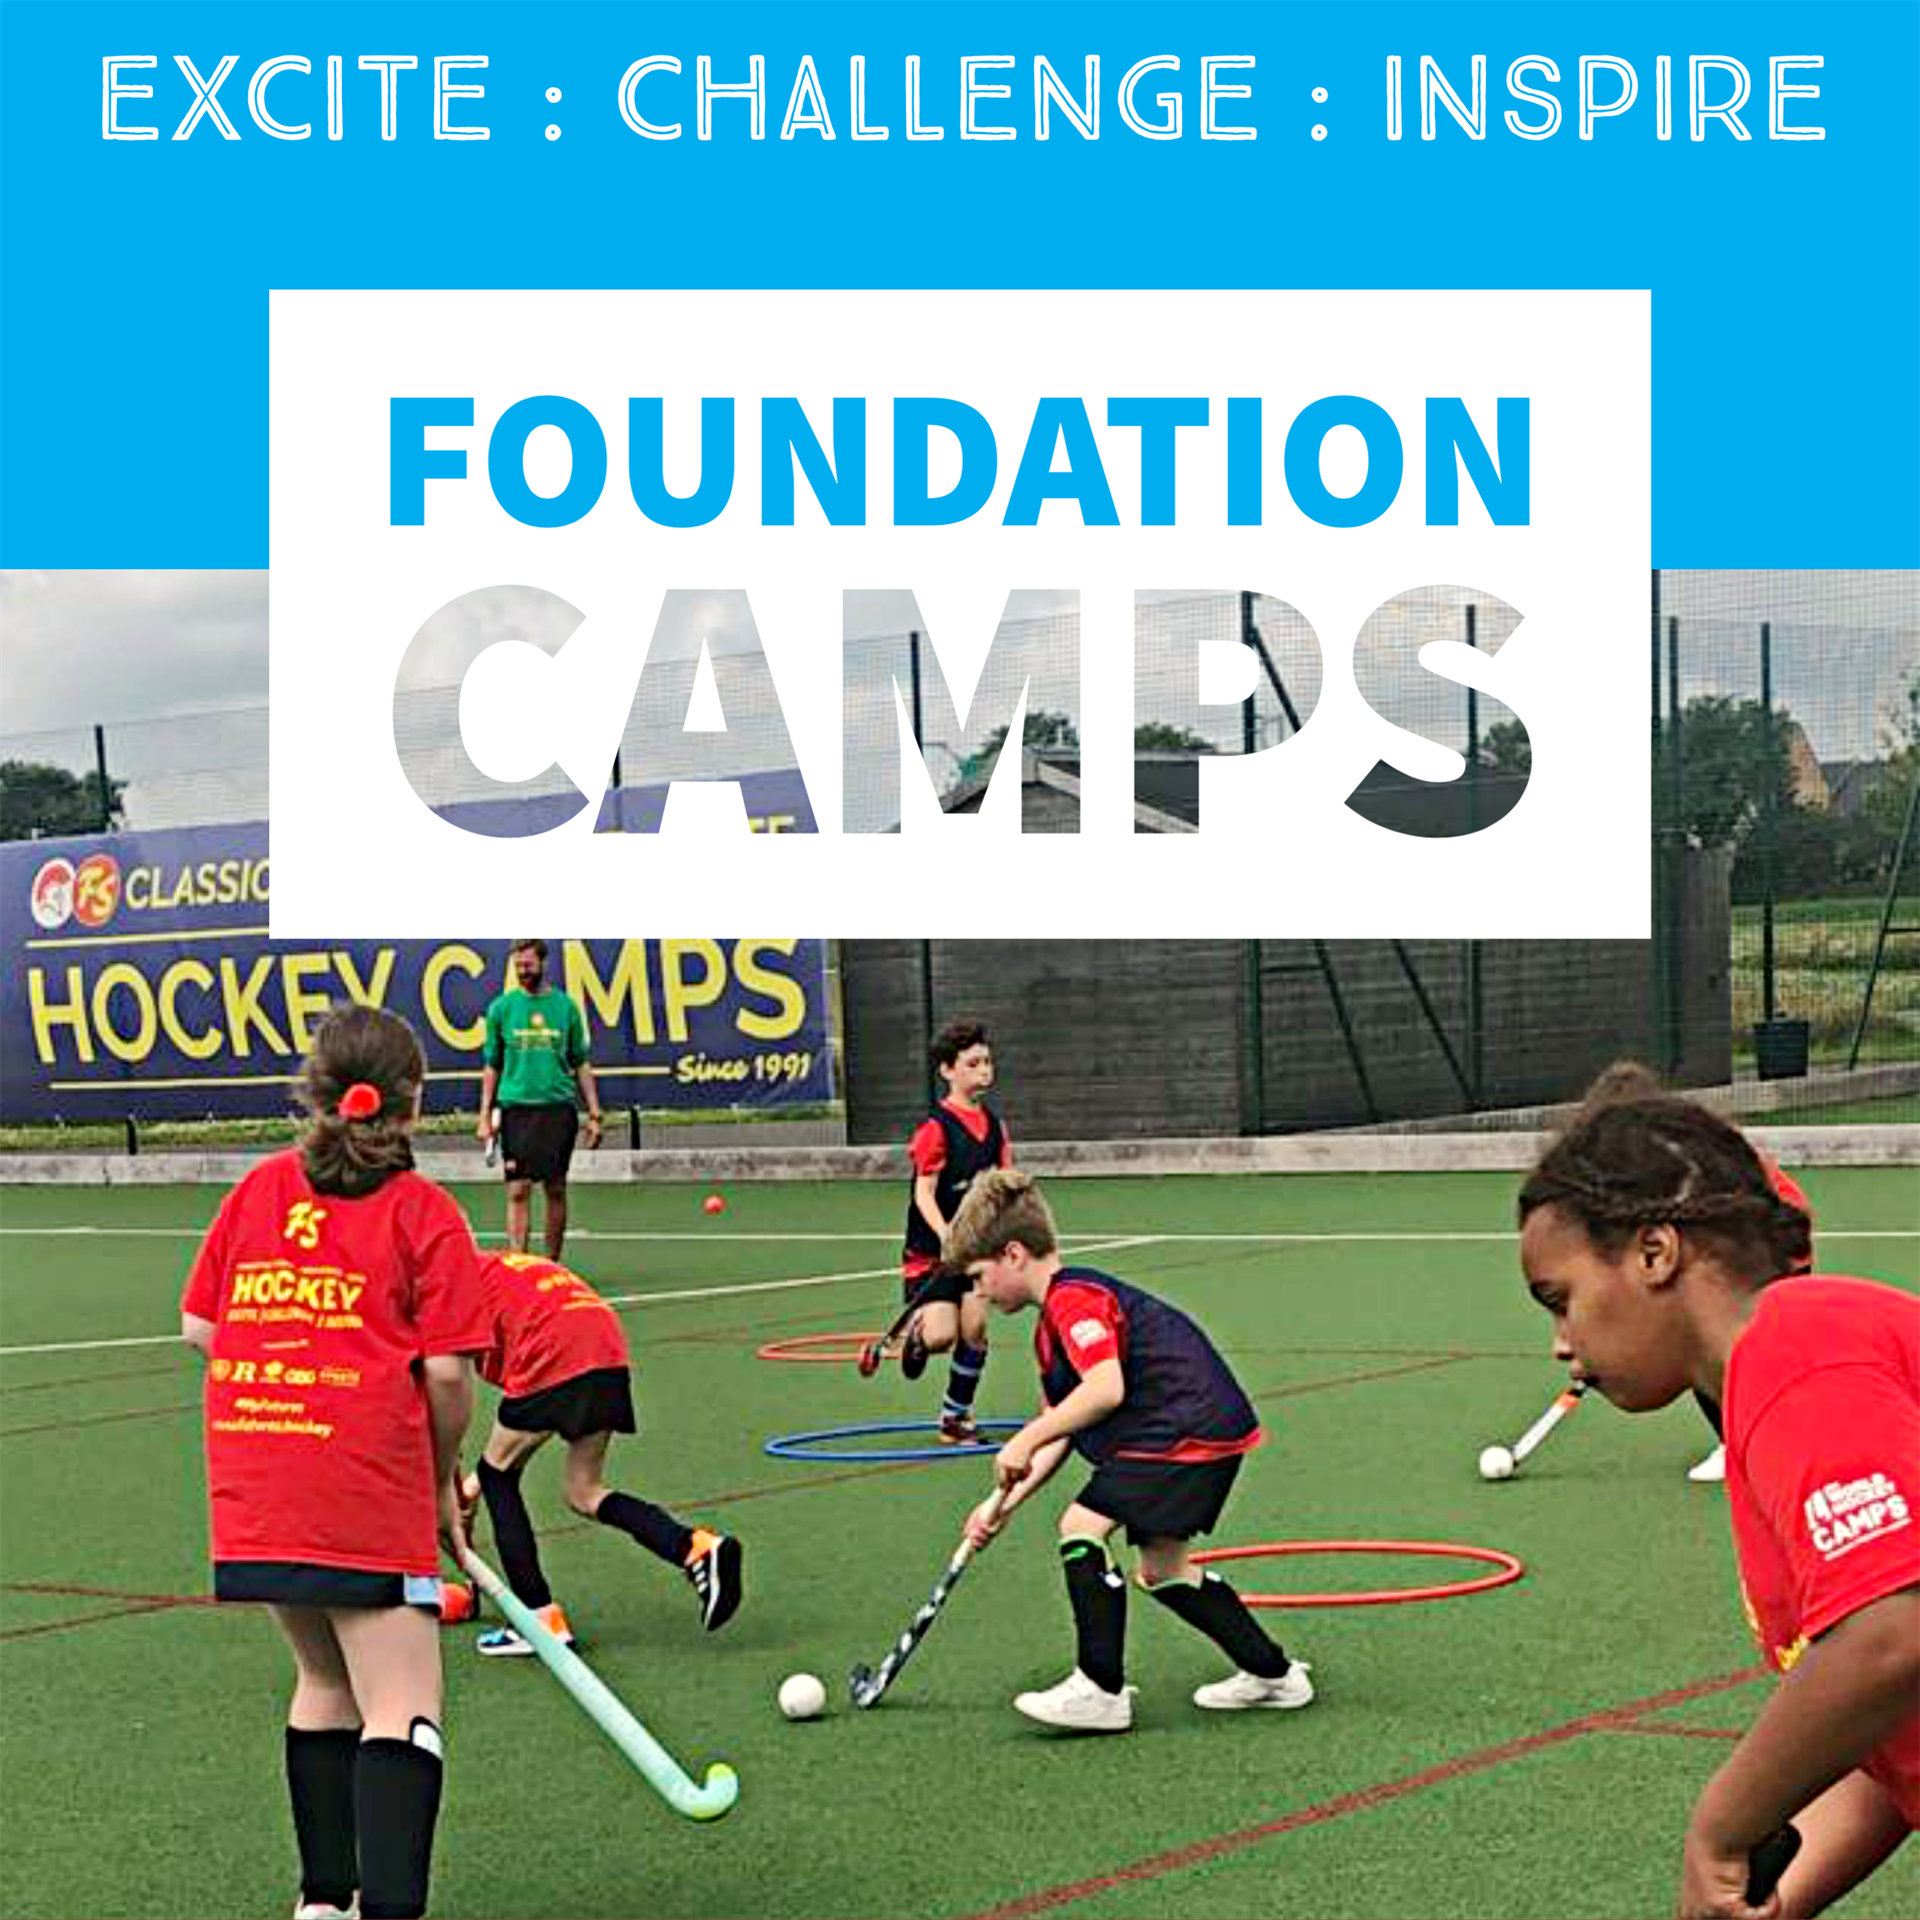 Our Foundation Hockey Camps are for our youngest hockey players aged 7 to 10 years, who are looking to develop their fundamental hockey skills in a super fun, game based environment.